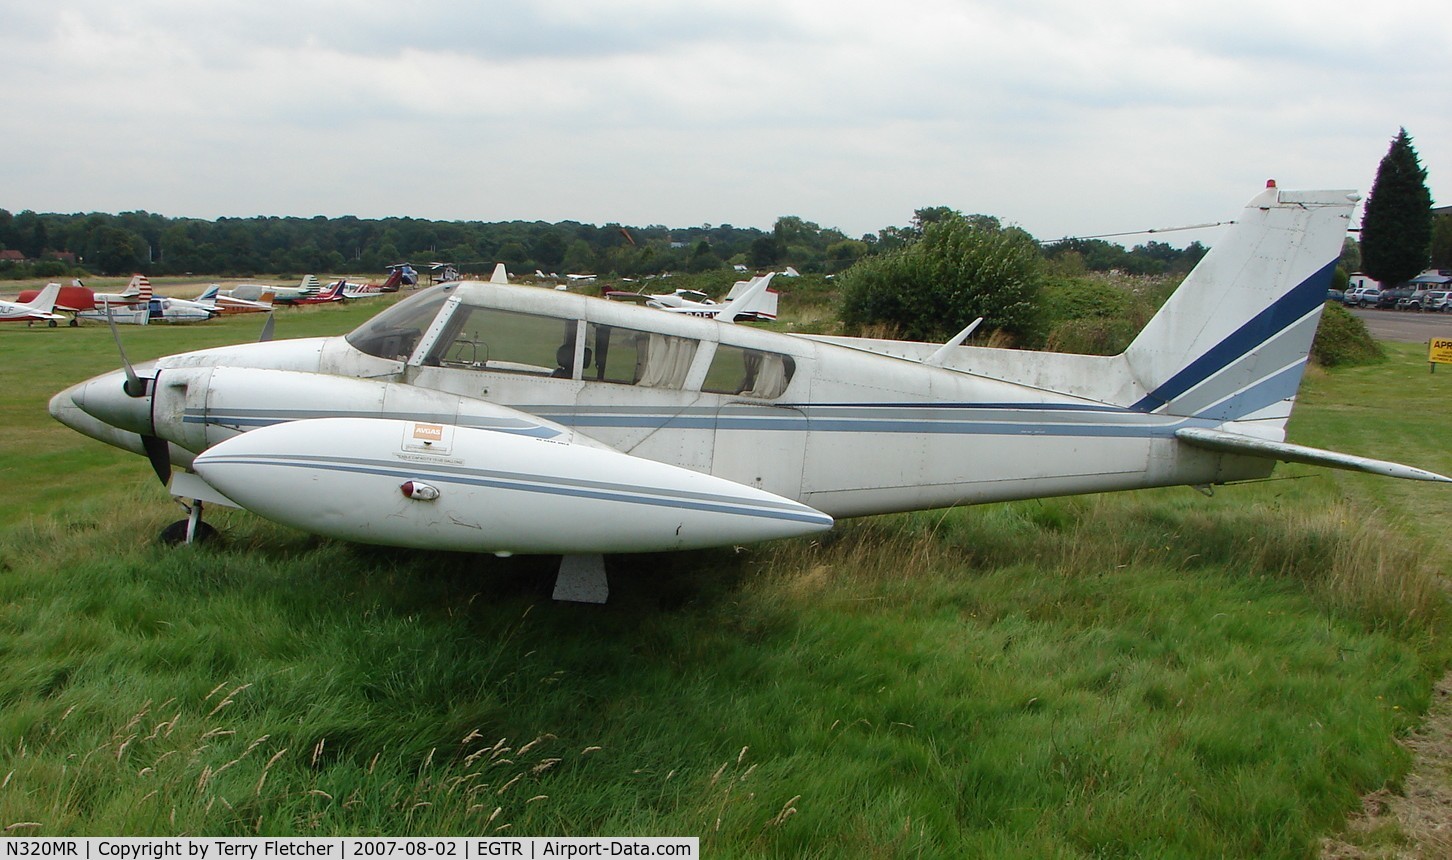 N320MR, 1969 Piper PA-30-160 C Twin Comanche C/N 30-1917, This aircraft is at Elstree UK and no longer wears its N320MR marks